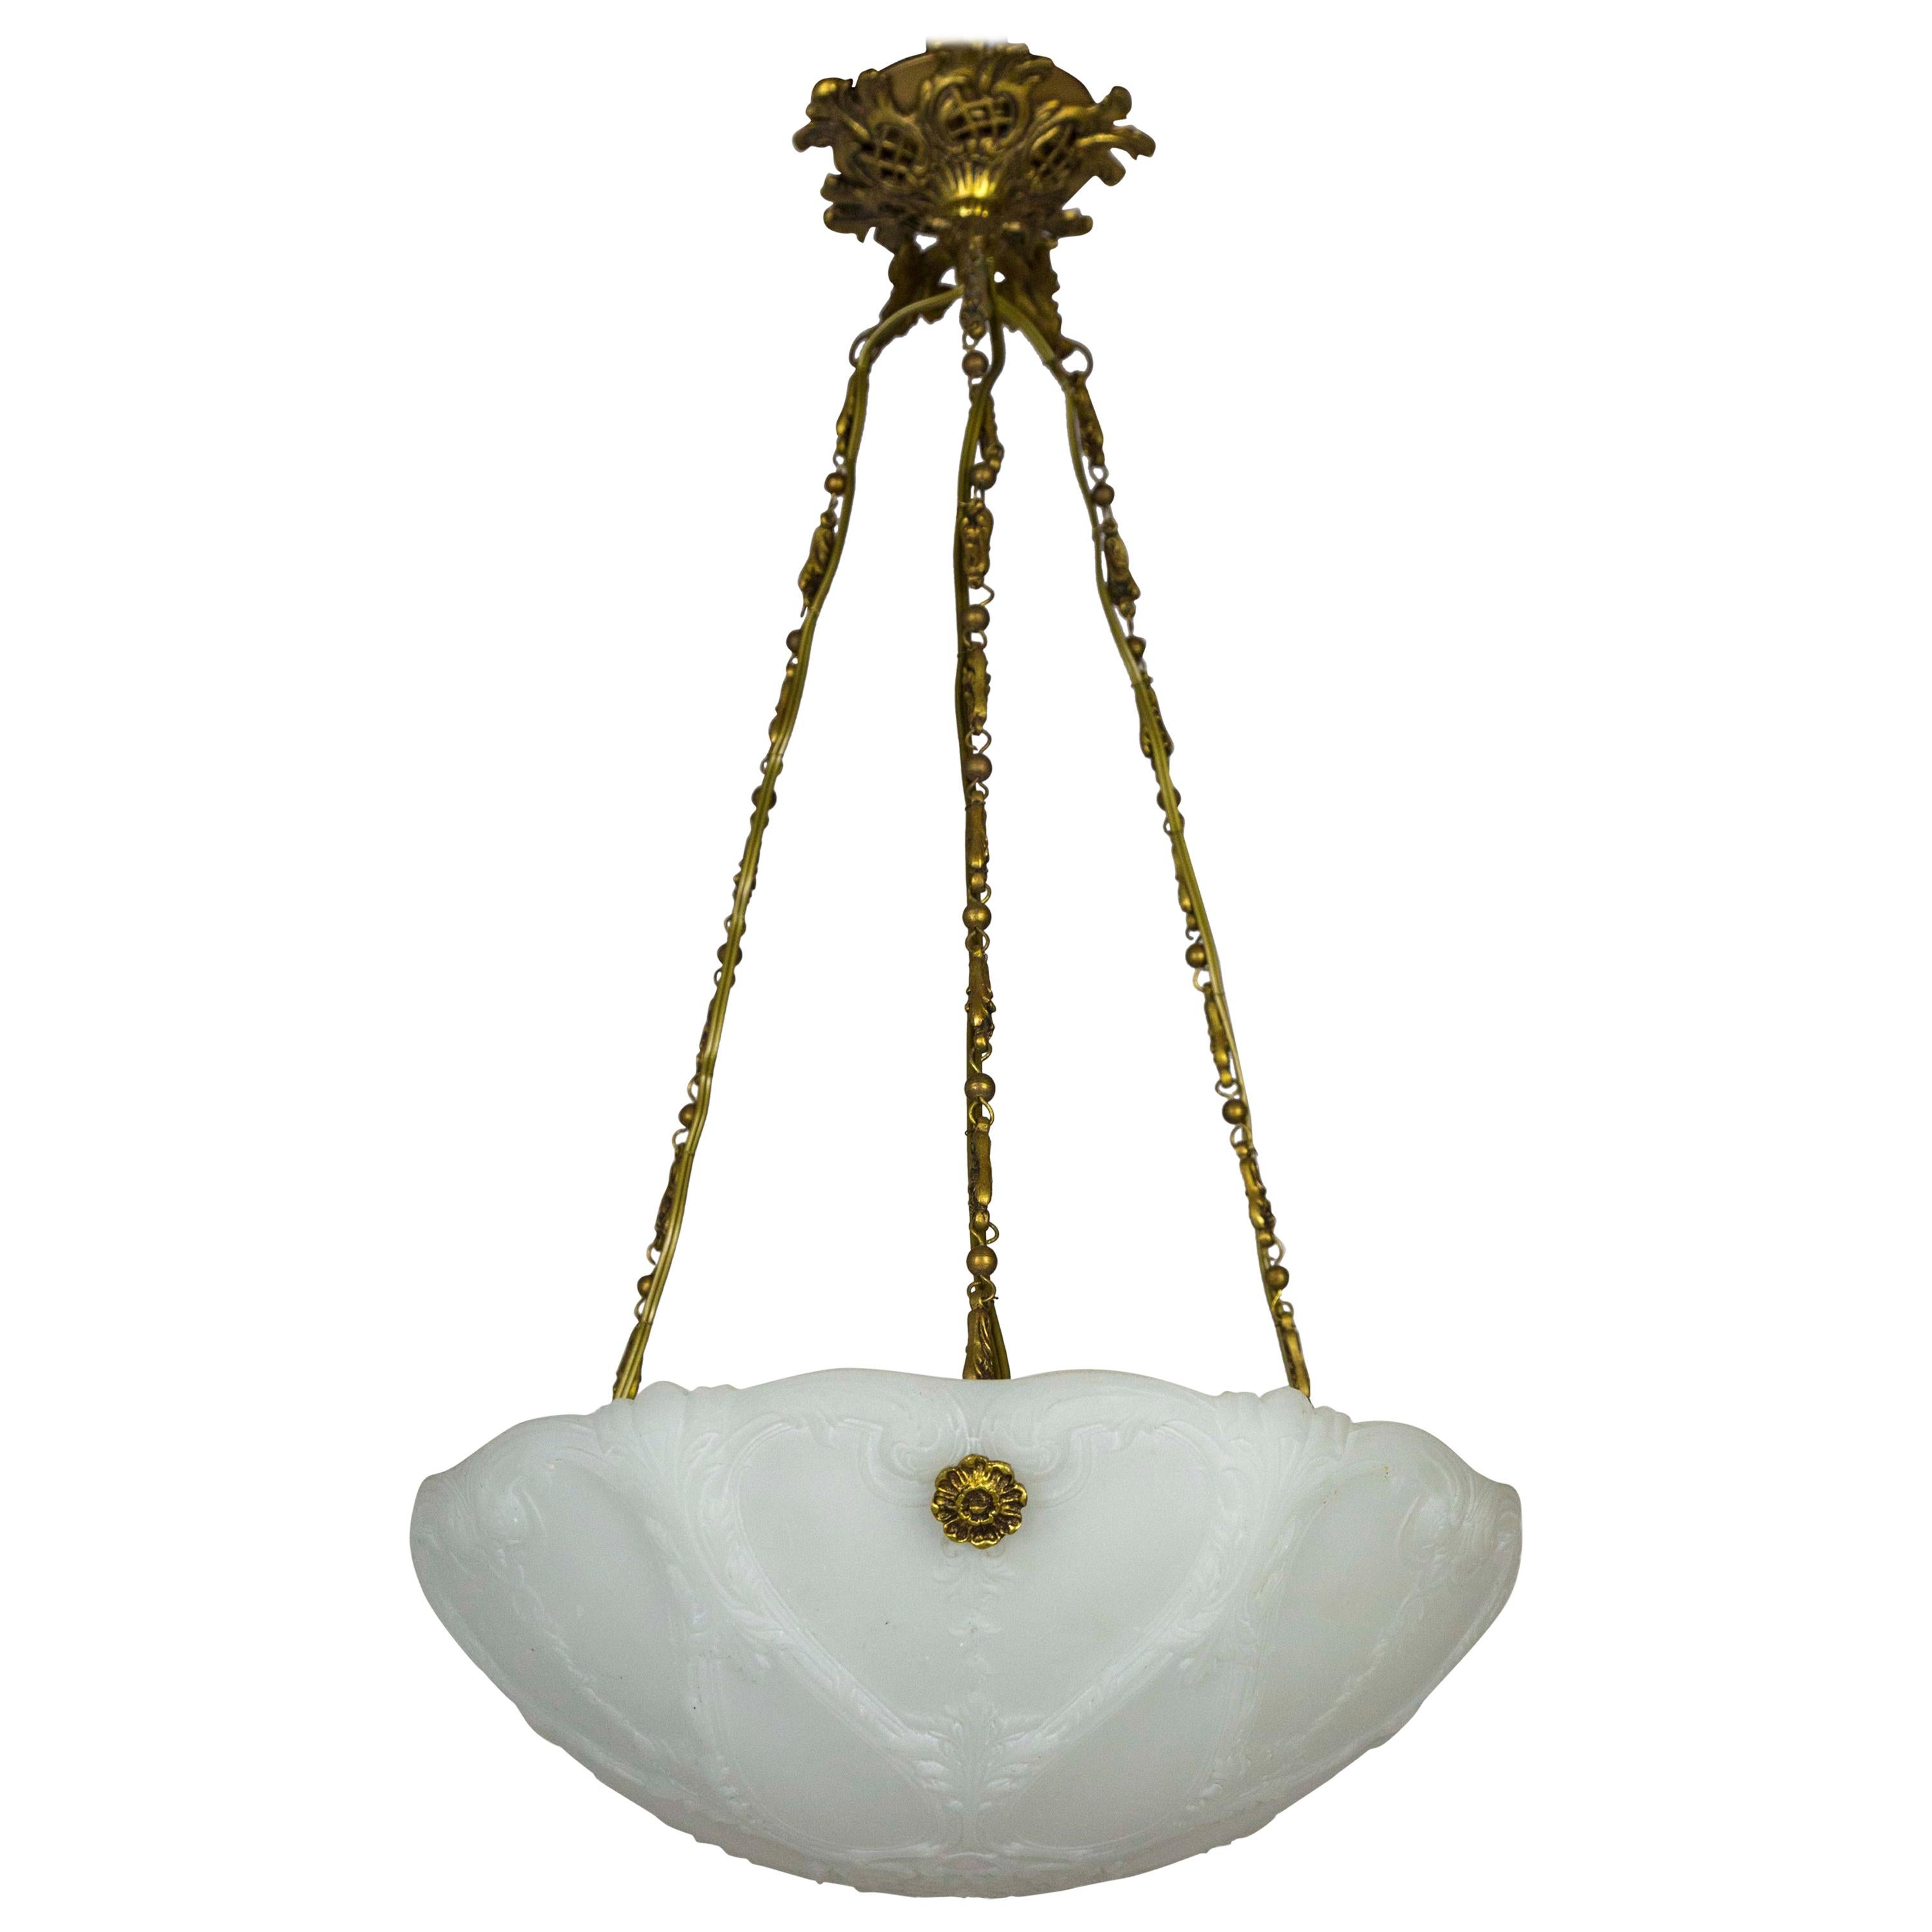 Early 1900s Neoclassical Detailed Milk Glass Bowl Pendant Light W/ Unique Chain